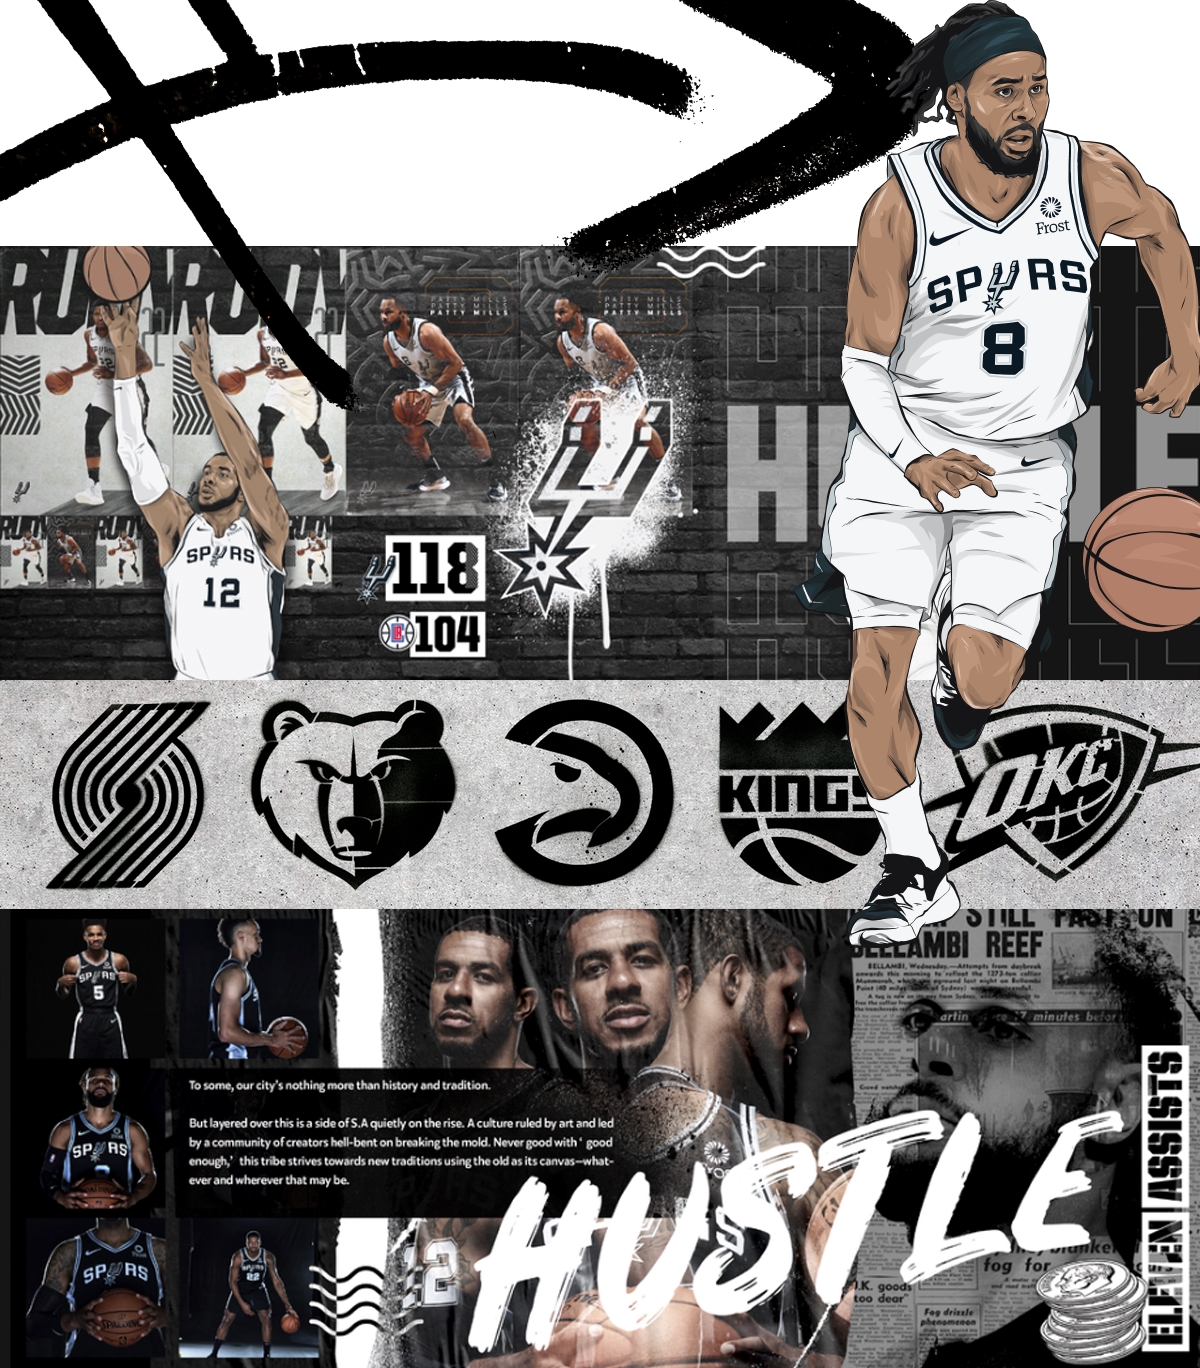 San Antonio Spurs 2019/2020 creative season campaign stylescape developed by Justin Winget and Justin Morin of SS&E Brand Engagement in partnership with Los Otros Murals and RobZilla illustration, San Antonio Spurs 2019/20 creative, Brand Engagement, Spurs Sports and Entertainment, San Antonio Spurs, Spurs Creative Director, Pistons Creative Director, Justin Winget, Brandon Gayle, Becky Kimbro, R.C. Buford, Lori Warren, Innovation, Spurs, Design